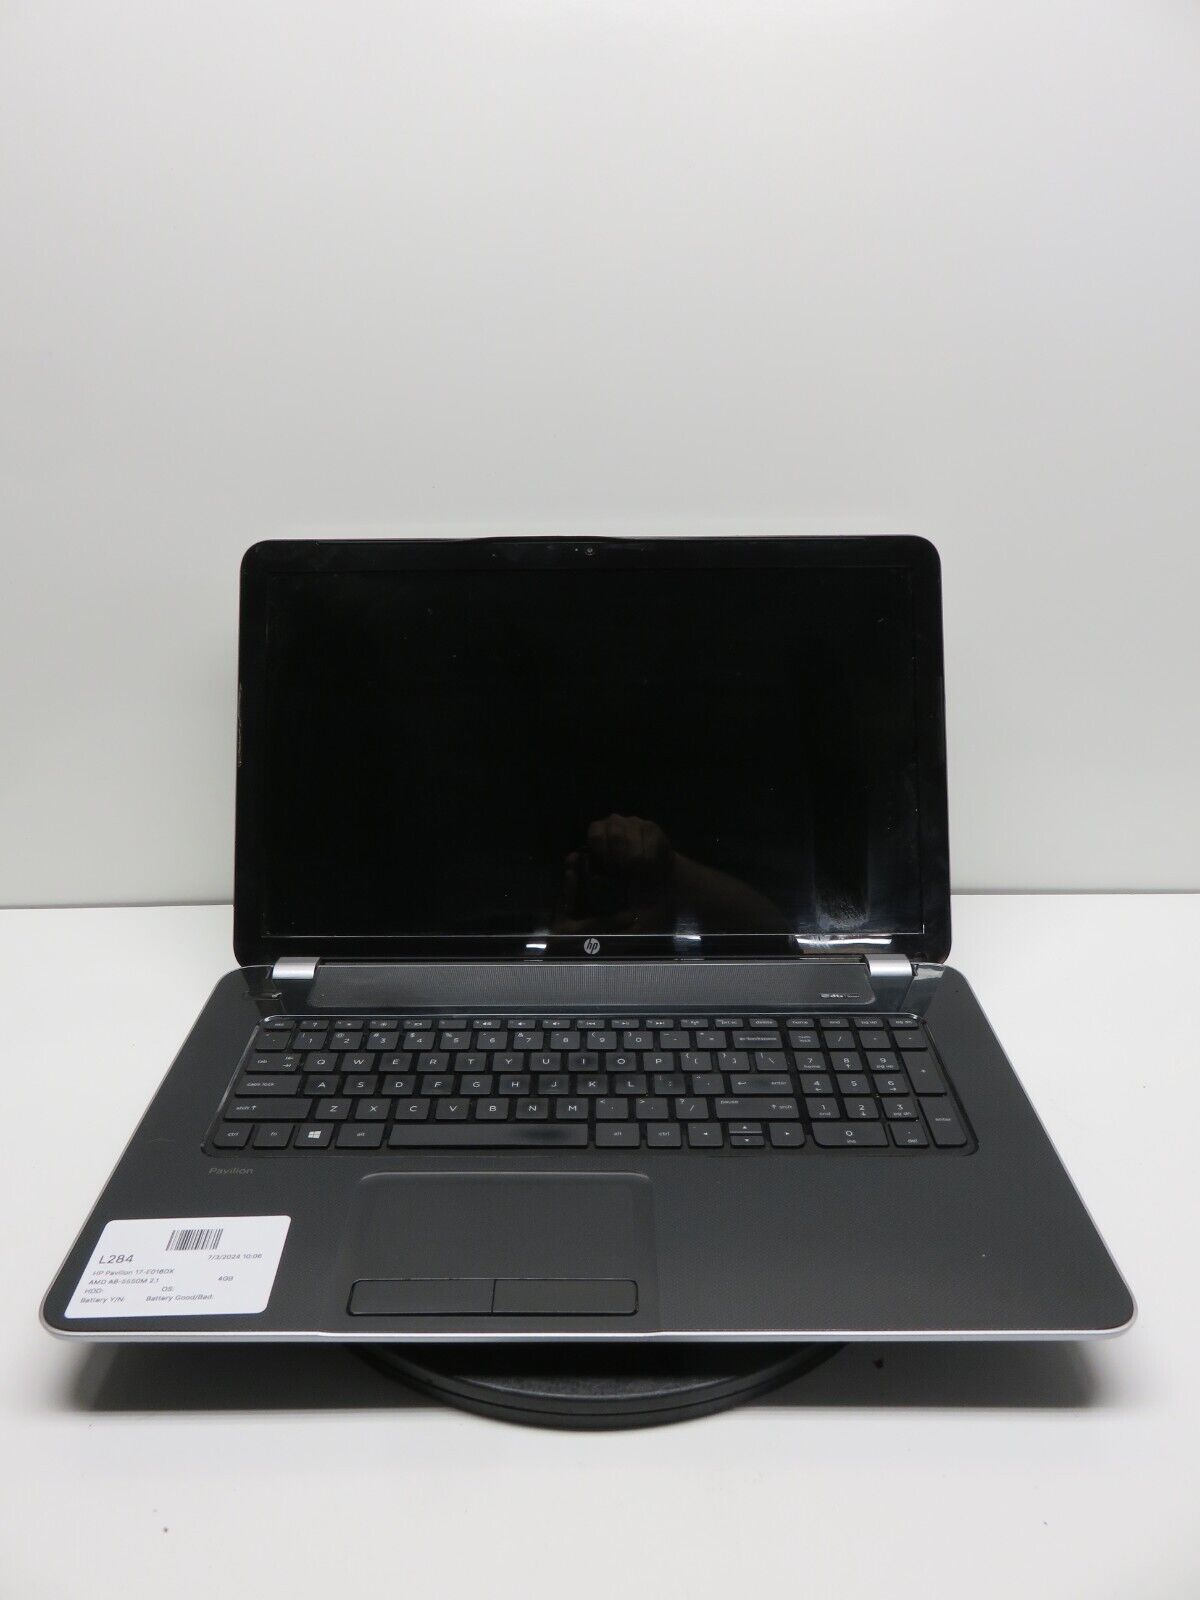 HP Pavilion 17-E016DX Laptop AMD A8-550M 4GB Ram No HDD or Battery